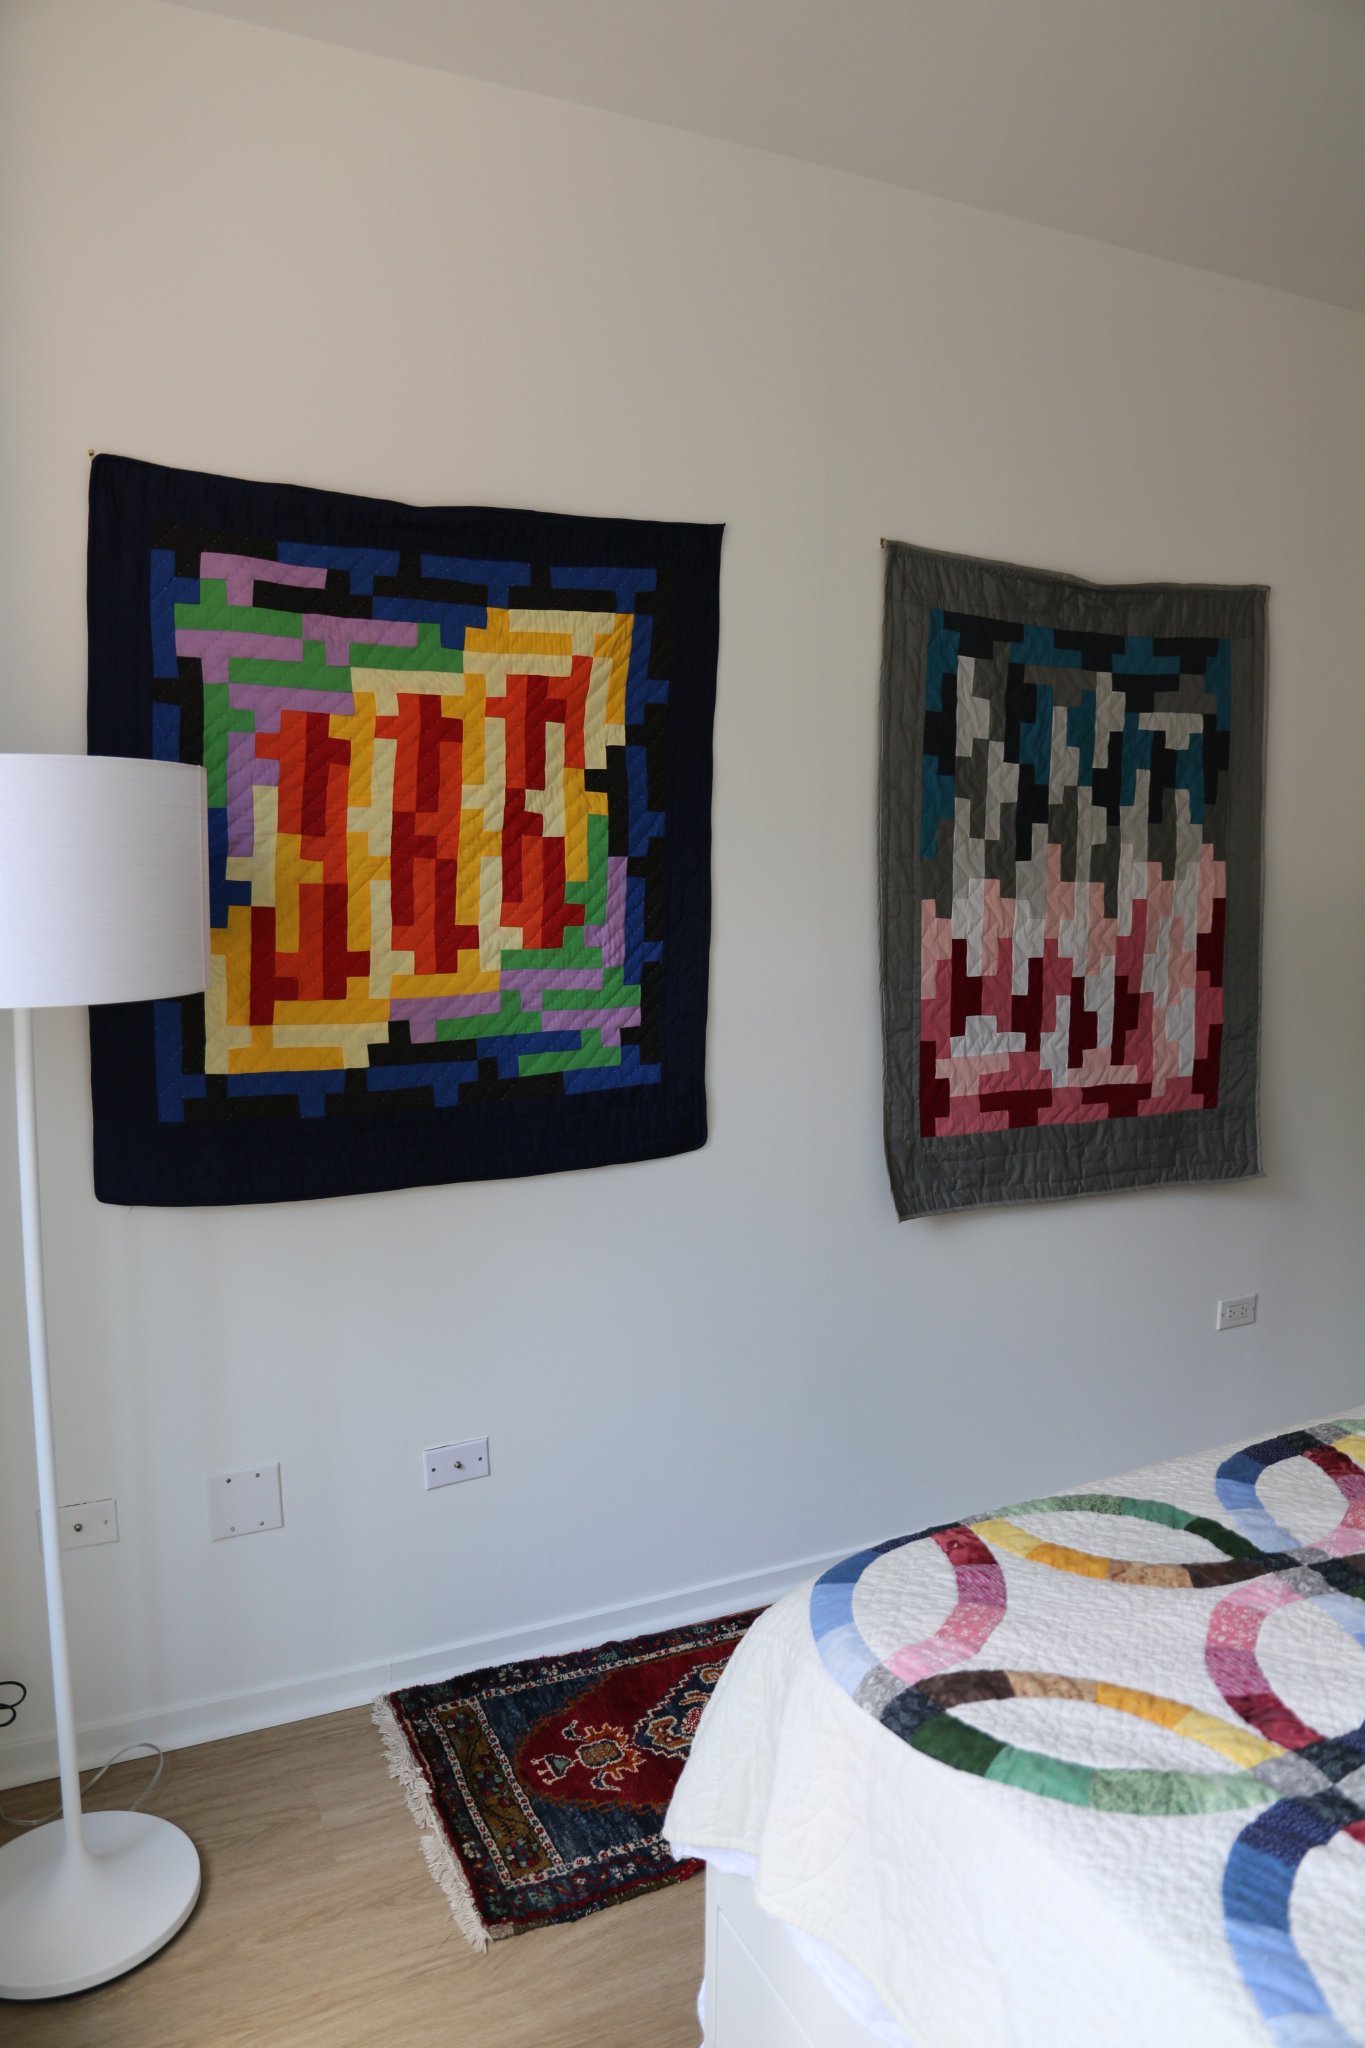 Quilts based on polyominoes